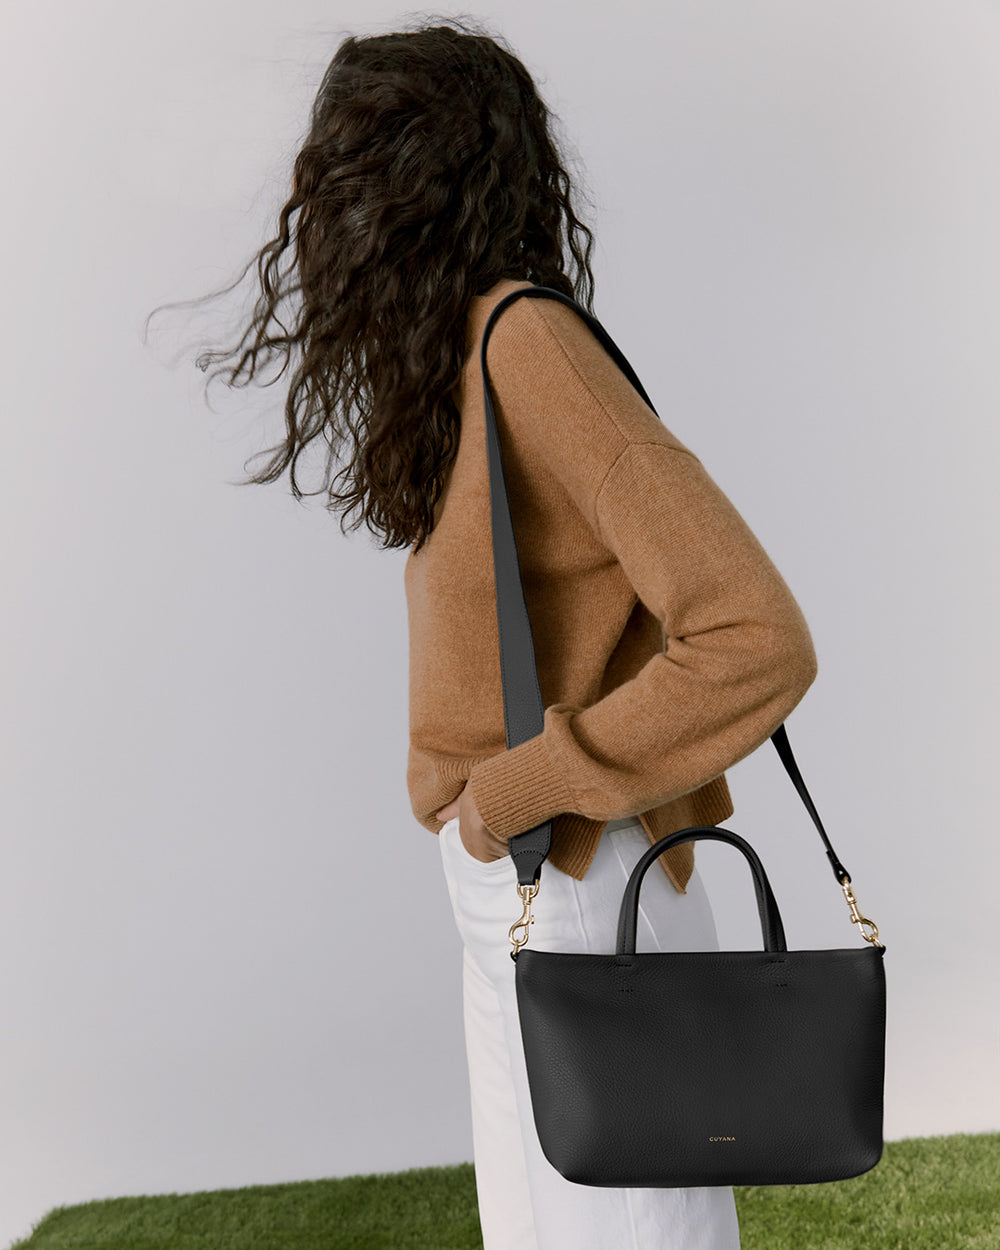 Woman from behind with curly hair carrying a handbag over her shoulder.